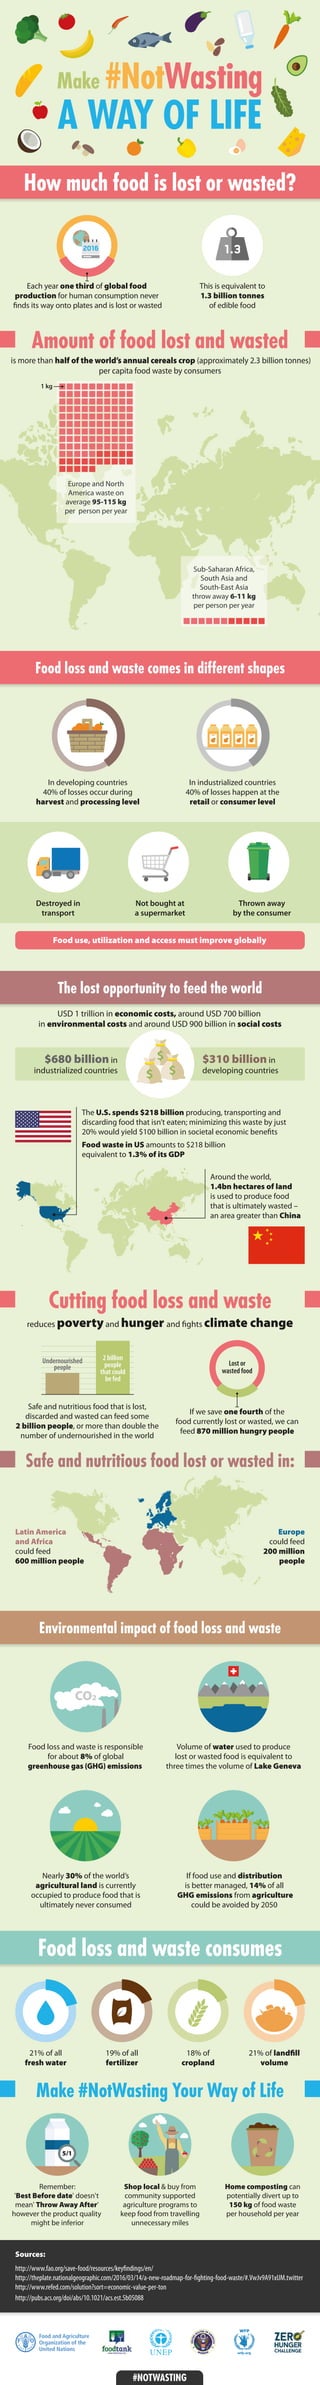 Sources:
http://www.fao.org/save-food/resources/keyﬁndings/en/
http://theplate.nationalgeographic.com/2016/03/14/a-new-roadmap-for-ﬁghting-food-waste/#.VwJv9A91xUM.twitter
http://www.refed.com/solution?sort=economic-value-per-ton
http://pubs.acs.org/doi/abs/10.1021/acs.est.5b05088
#NOTWASTING
Home composting can
potentially divert up to
150 kg of food waste
per household per year
Remember:
'Best Before date' doesn't
mean' Throw Away After’
however the product quality
might be inferior
5/1
Shop local & buy from
community supported
agriculture programs to
keep food from travelling
unnecessary miles
Make #NotWasting Your Way of Life
Food loss and waste consumes
21% of all
fresh water
19% of all
fertilizer
18% of
cropland
21% of landﬁll
volume
Food loss and waste is responsible
for about 8% of global
greenhouse gas (GHG) emissions
Volume of water used to produce
lost or wasted food is equivalent to
three times the volume of Lake Geneva
Nearly 30% of the world’s
agricultural land is currently
occupied to produce food that is
ultimately never consumed
If food use and distribution
is better managed, 14% of all
GHG emissions from agriculture
could be avoided by 2050
Environmental impact of food loss and waste
CO2
Safe and nutritious food lost or wasted in:
Latin America
and Africa
could feed
600 million people
Europe
could feed
200 million
people
USD 1 trillion in economic costs, around USD 700 billion
in environmental costs and around USD 900 billion in social costs
$310 billion in
developing countries
$680 billion in
industrialized countries
Around the world,
1.4bn hectares of land
is used to produce food
that is ultimately wasted –
an area greater than China
The U.S. spends $218 billion producing, transporting and
discarding food that isn’t eaten; minimizing this waste by just
20% would yield $100 billion in societal economic beneﬁts
Food waste in US amounts to $218 billion
equivalent to 1.3% of its GDP
The lost opportunity to feed the world
If we save one fourth of the
food currently lost or wasted, we can
feed 870 million hungry people
Safe and nutritious food that is lost,
discarded and wasted can feed some
2 billion people, or more than double the
number of undernourished in the world
Lost or
wasted food
Undernourished
people
2 billion
people
that could
be fed
reduces povertyand hunger and ﬁghts climate change
Cutting food loss and waste
In developing countries
40% of losses occur during
harvest and processing level
In industrialized countries
40% of losses happen at the
retail or consumer level
Food use, utilization and access must improve globally
Food loss and waste comes in different shapes
Thrown away
by the consumer
Destroyed in
transport
Not bought at
a supermarket
Sub-Saharan Africa,
South Asia and
South-East Asia
throw away 6-11 kg
per person per year
Amount of food lost and wasted
is more than half of the world’s annual cereals crop (approximately 2.3 billion tonnes)
per capita food waste by consumers
Europe and North
America waste on
average 95-115 kg
per person per year
1 kg
How much food is lost or wasted?
Each year one third of global food
production for human consumption never
ﬁnds its way onto plates and is lost or wasted
Make #NotWasting
A WAY OF LIFE
This is equivalent to
1.3 billion tonnes
of edible food
1.3
 